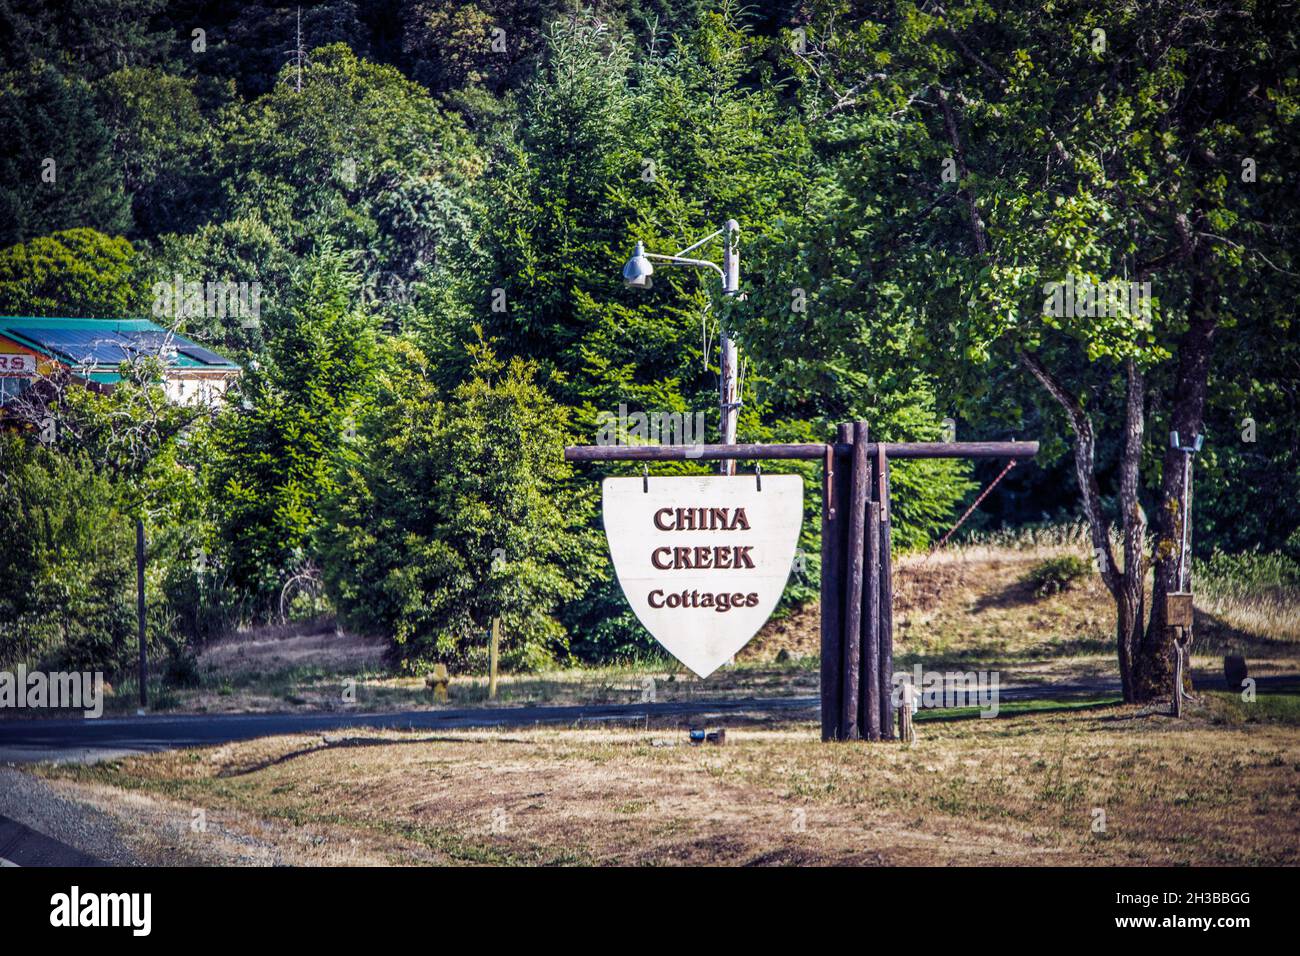 05 27 2021 Willow Creek, CA USA Sign for China Creek Cottages  in Northern California in wooded area in danger of forest fires Stock Photo